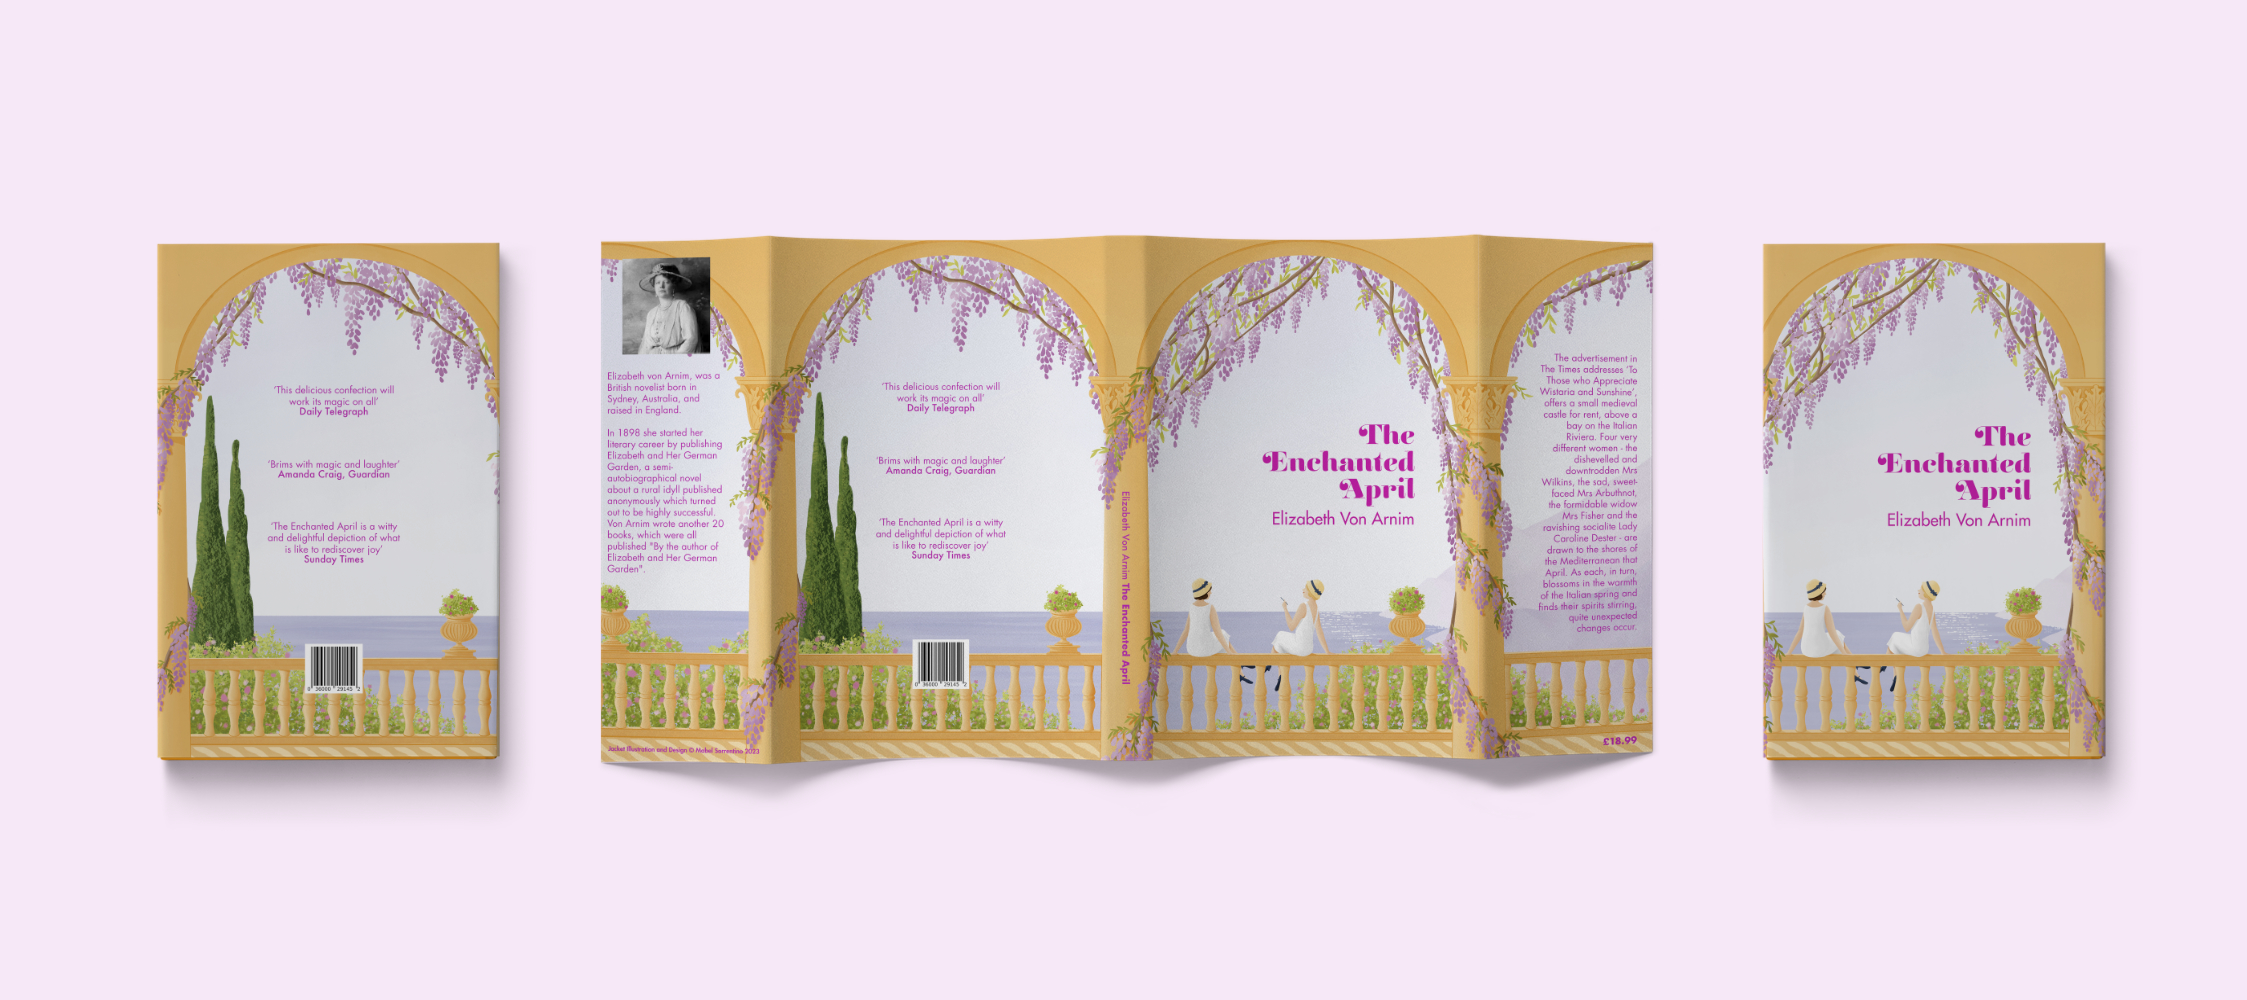 Dust jacket and front and back cover for The Enchanted April book cover illustration